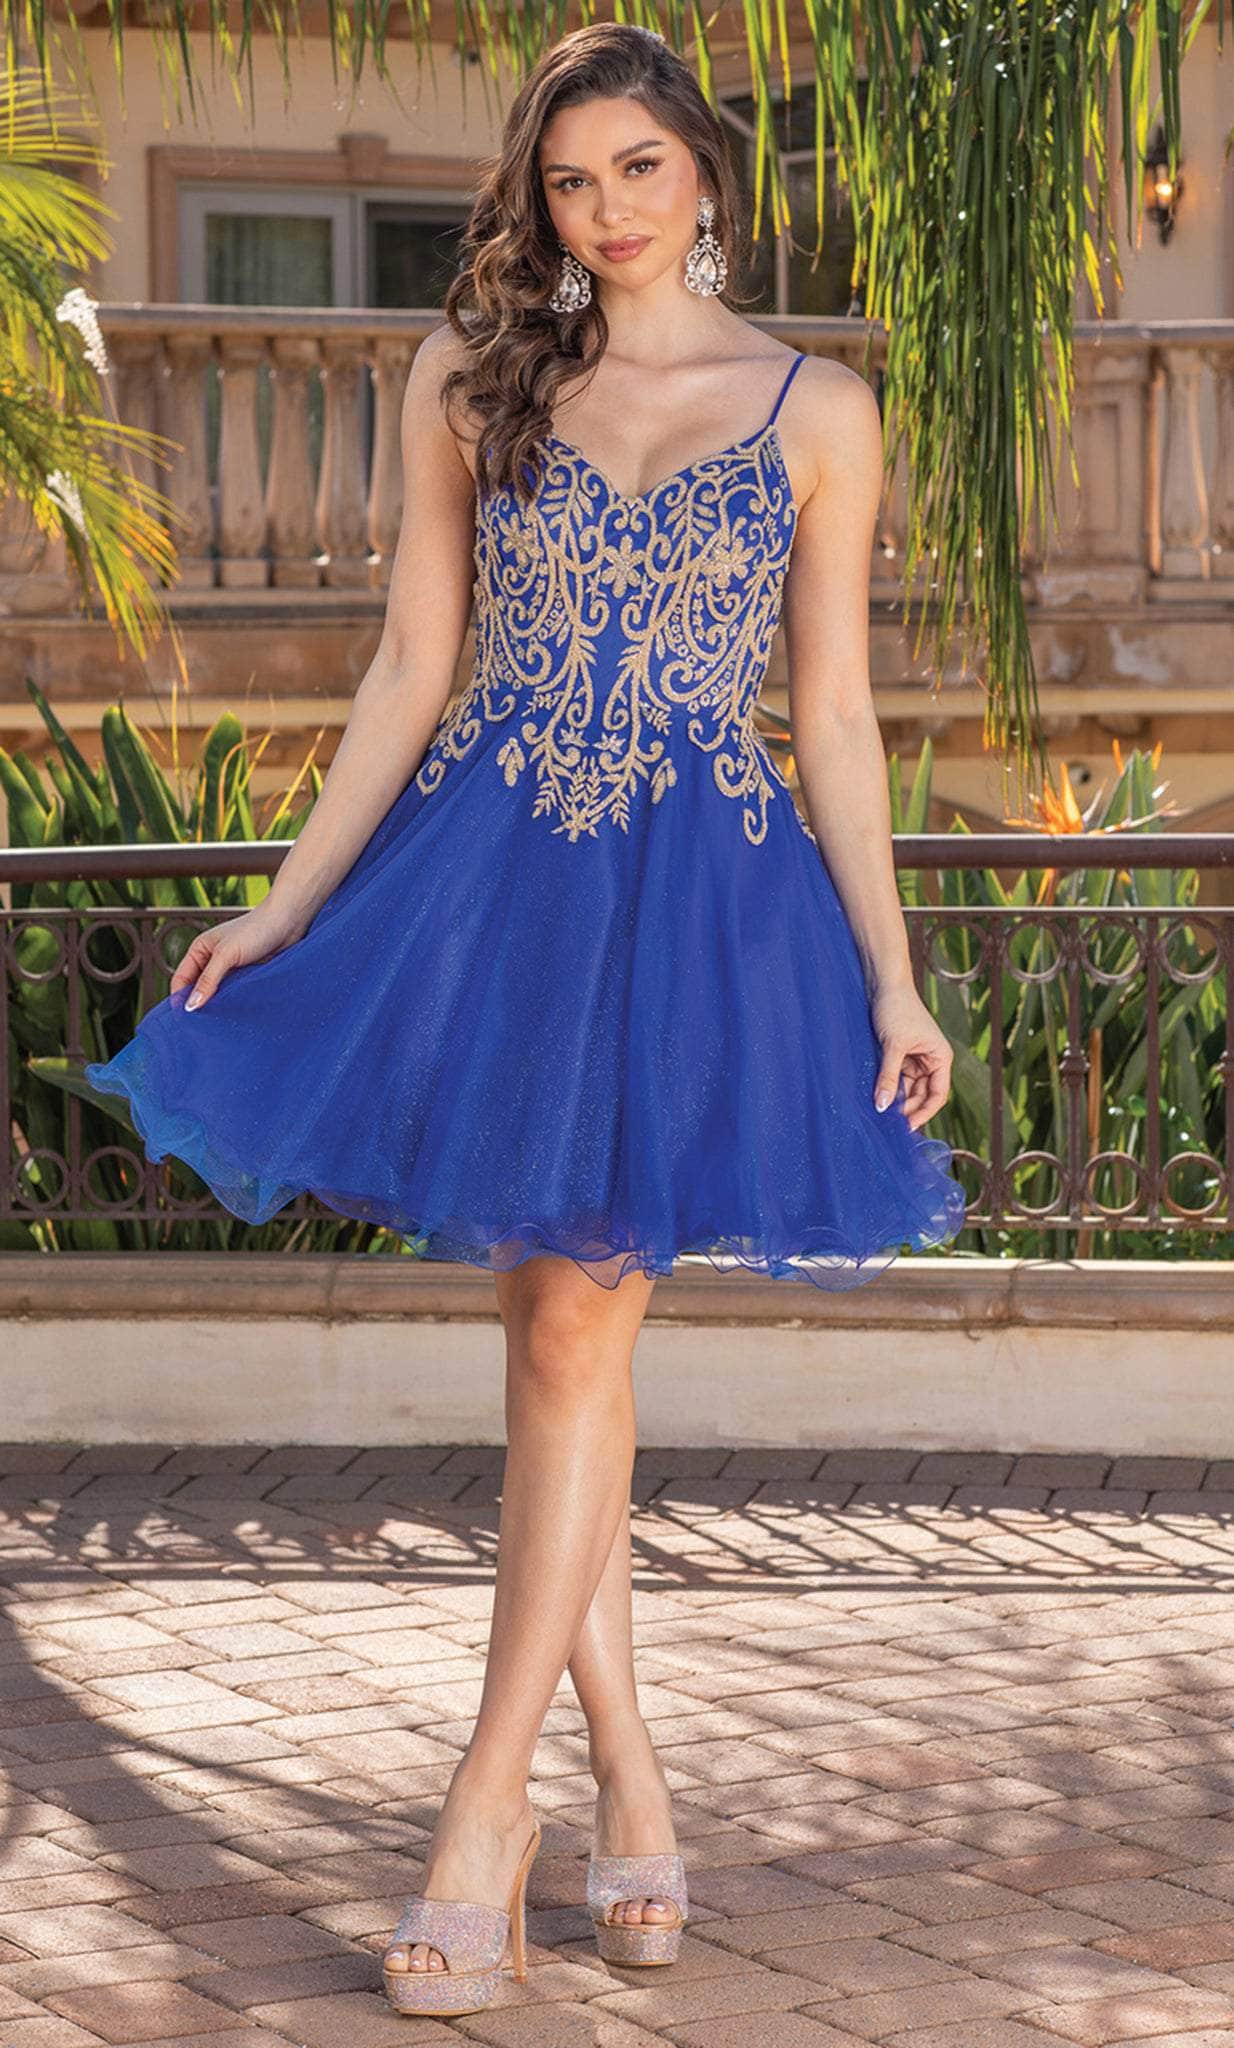 Dancing Queen 3330 - Embroidered Bodice Cocktail Dress
